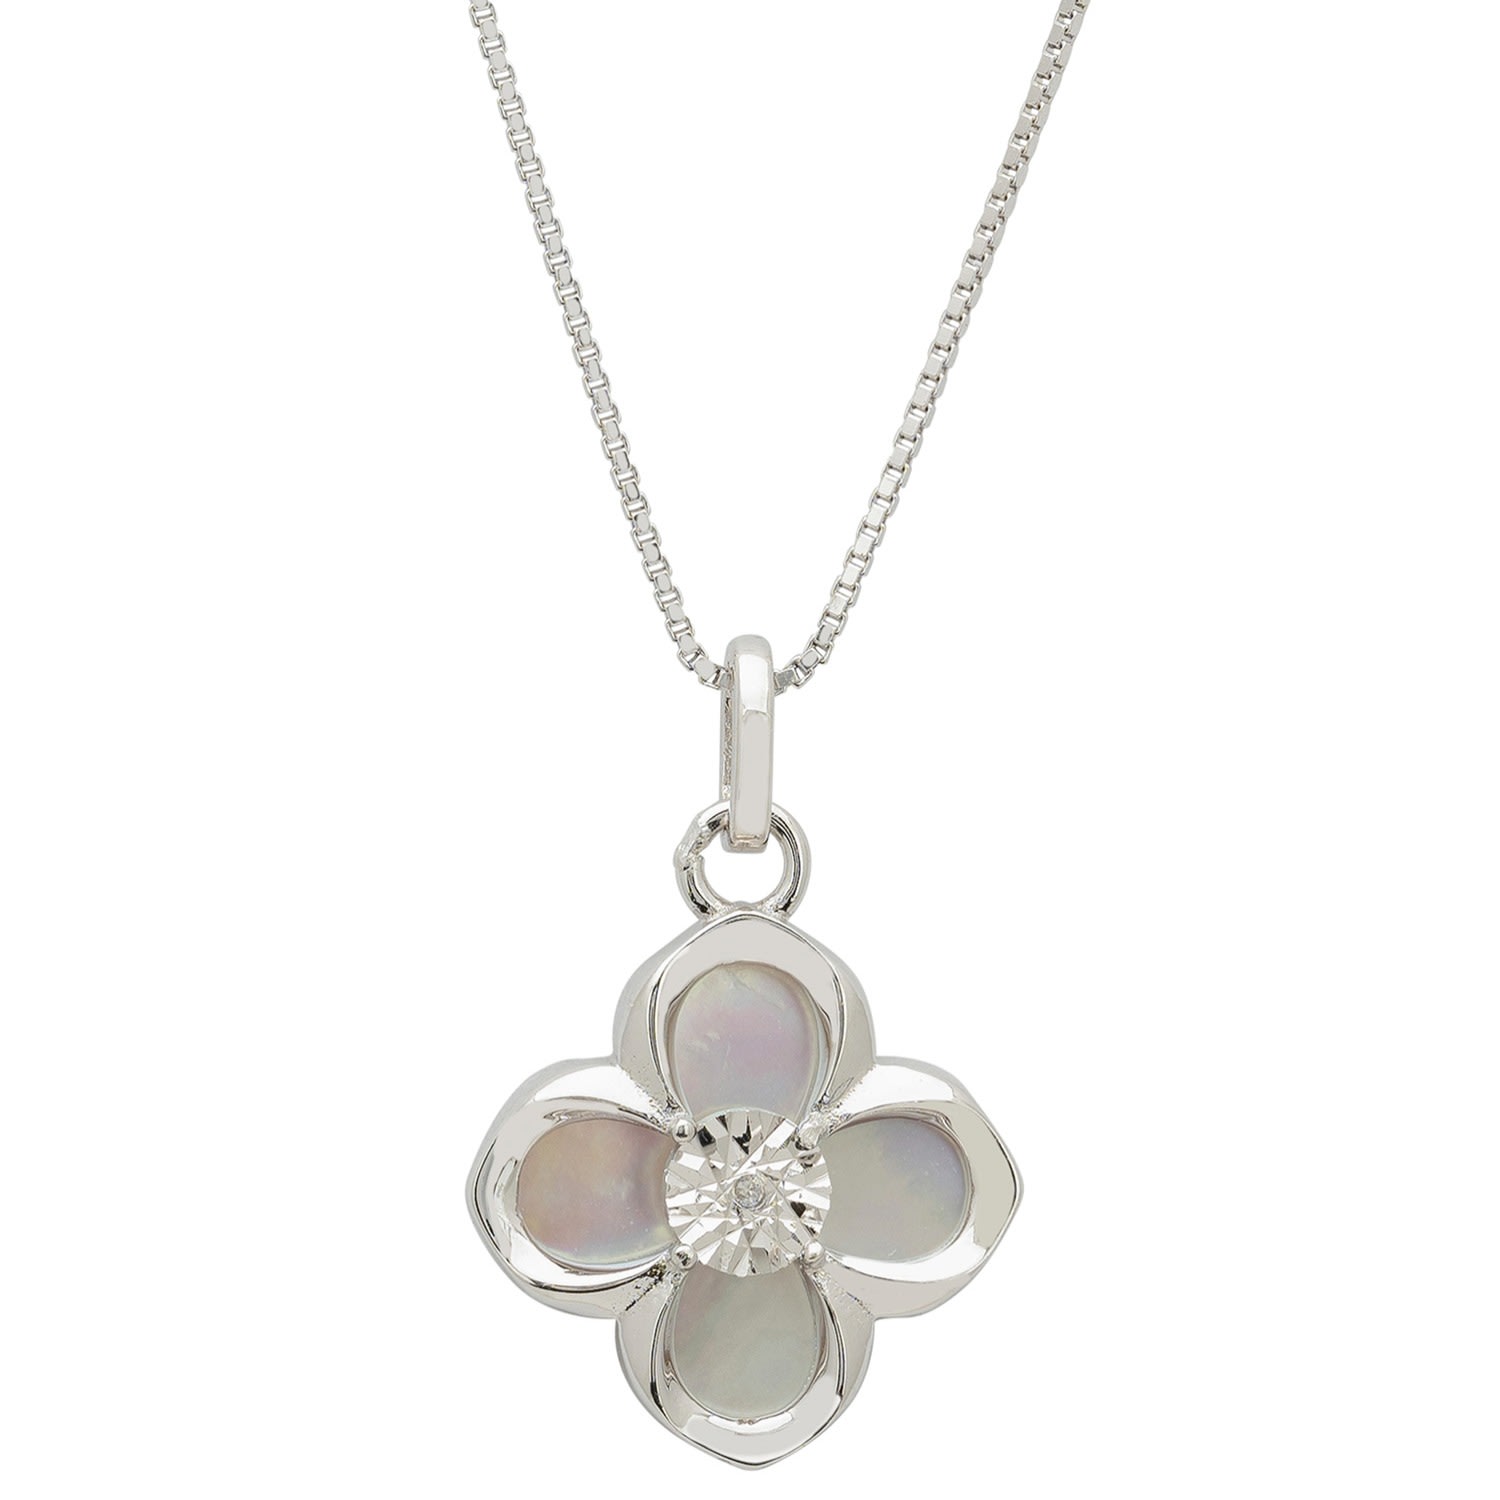 Women’s Silver / White Clover Flower Mother Of Pearl Pendant Necklace Silver Latelita